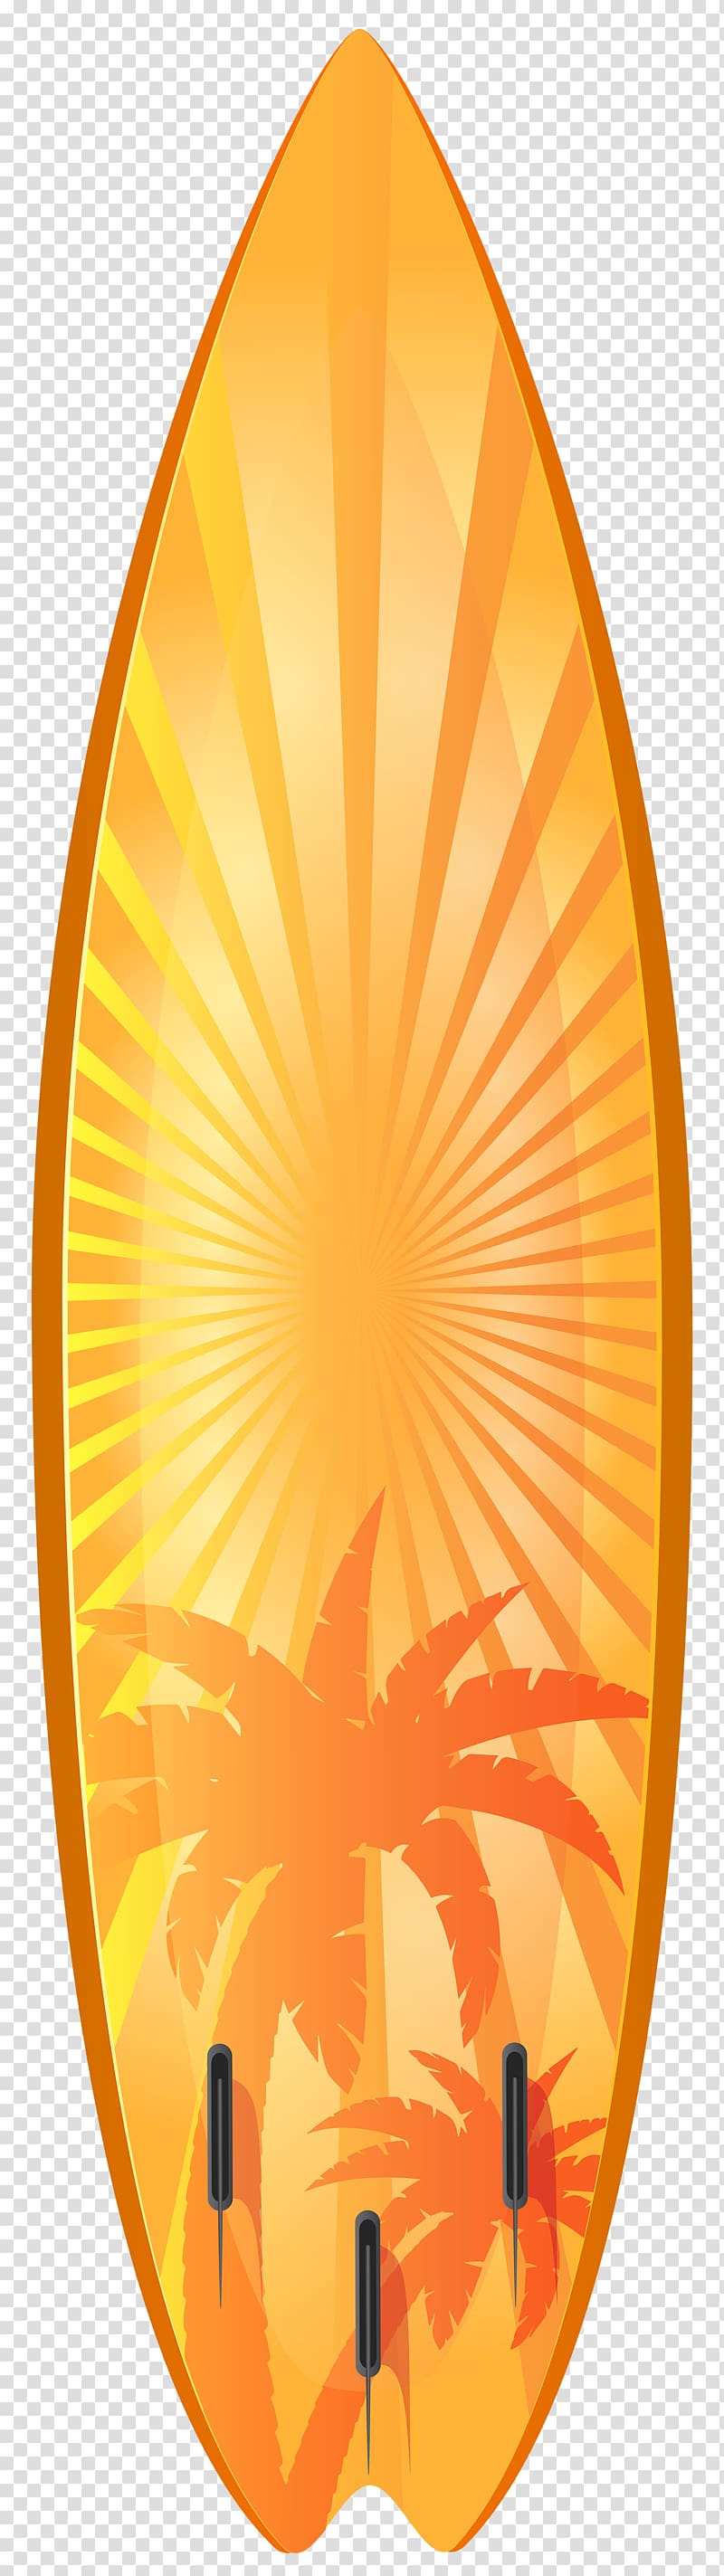 orange surfboard, Surfboard Surfing , Orange Surfboard with Palm Trees transparent background PNG clipart